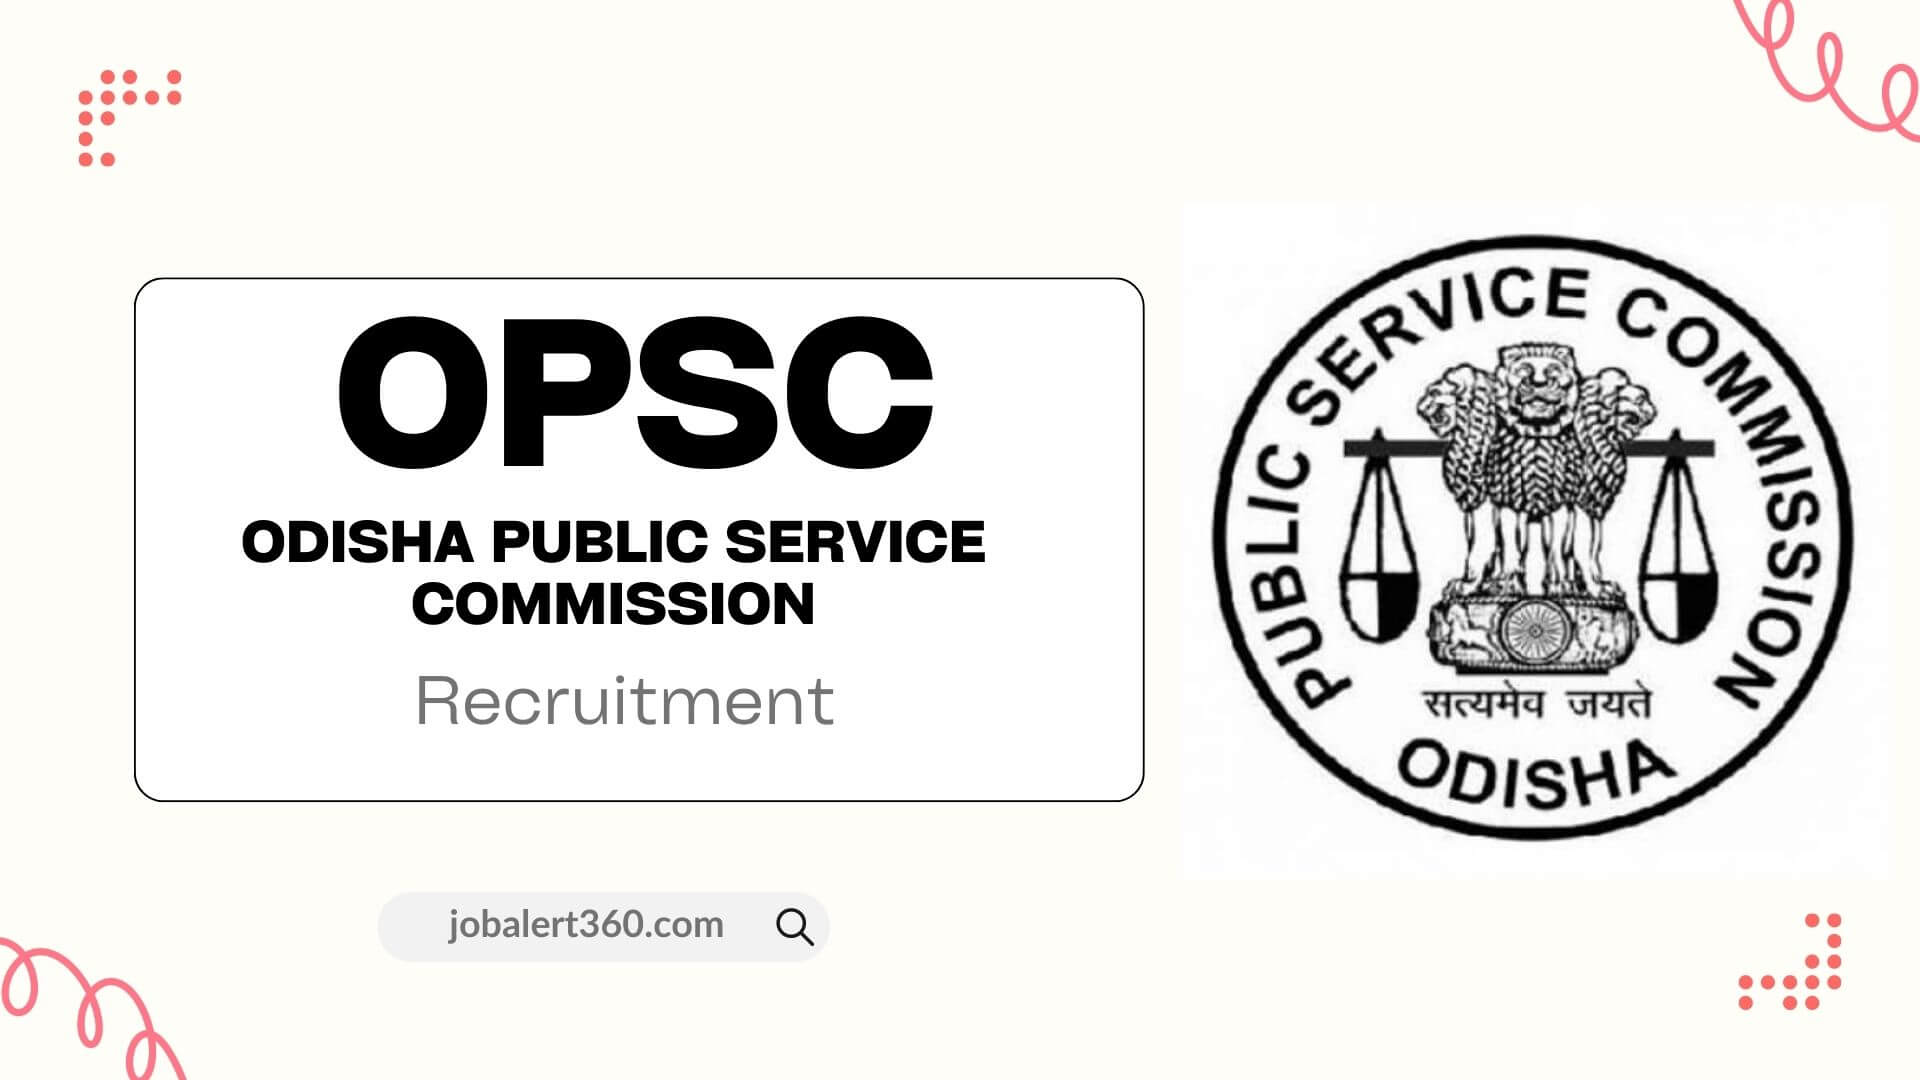 OPSC Recruitment text and official logo